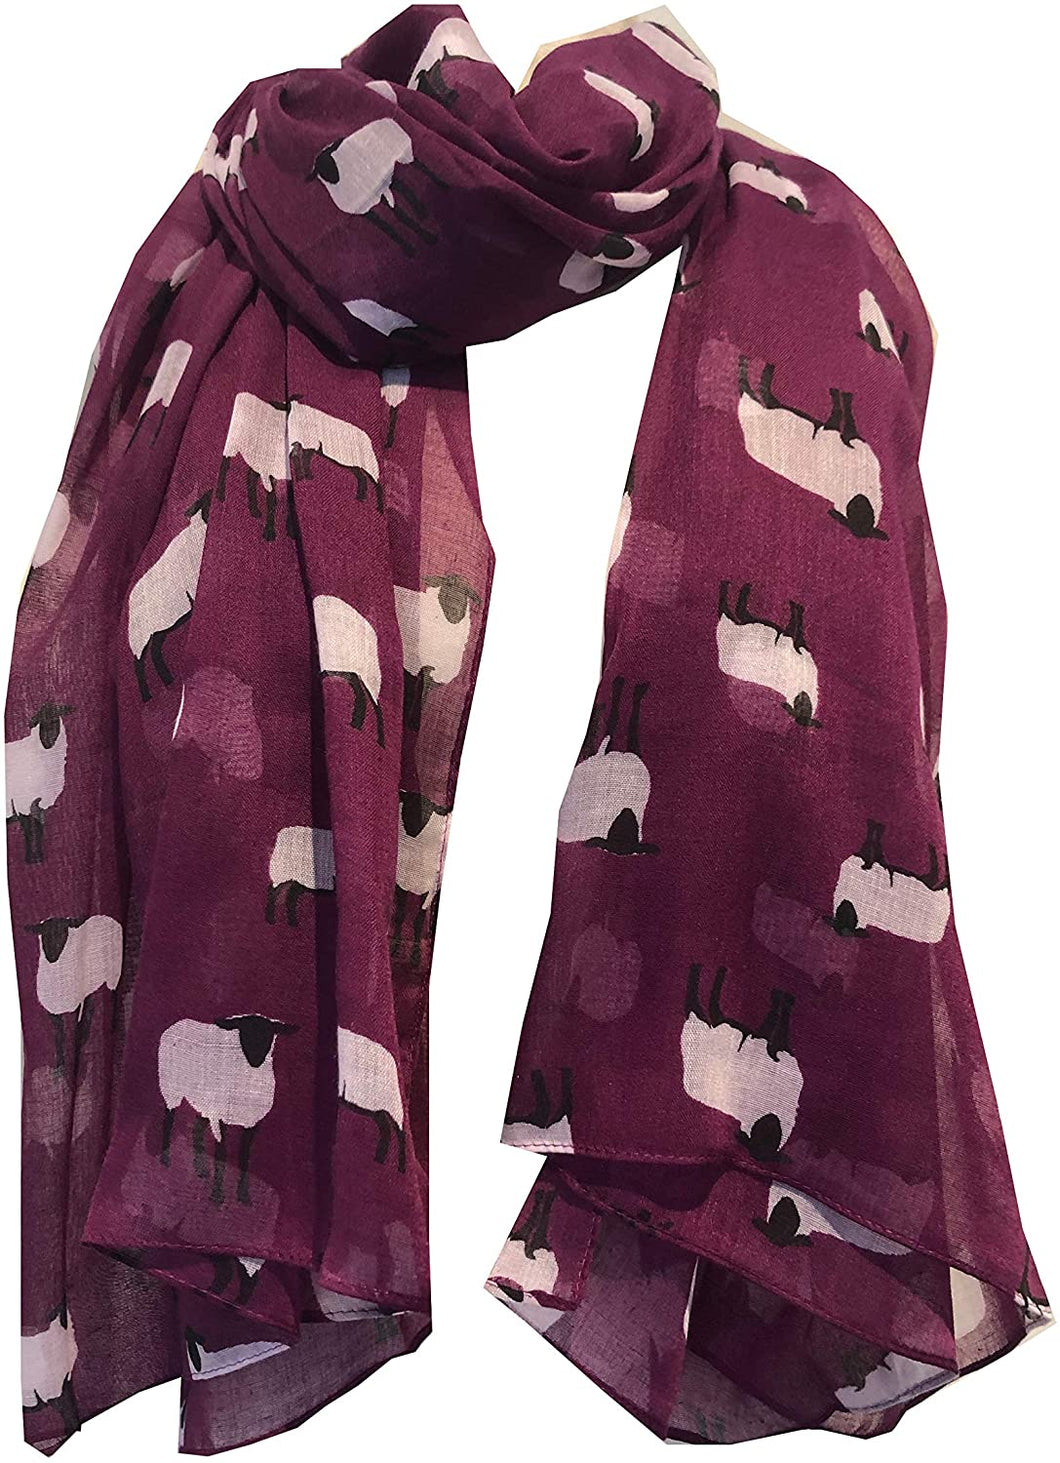 Pamper Yourself Now Purple Sheep Design Long Scarf, Soft Ladies Fashion London